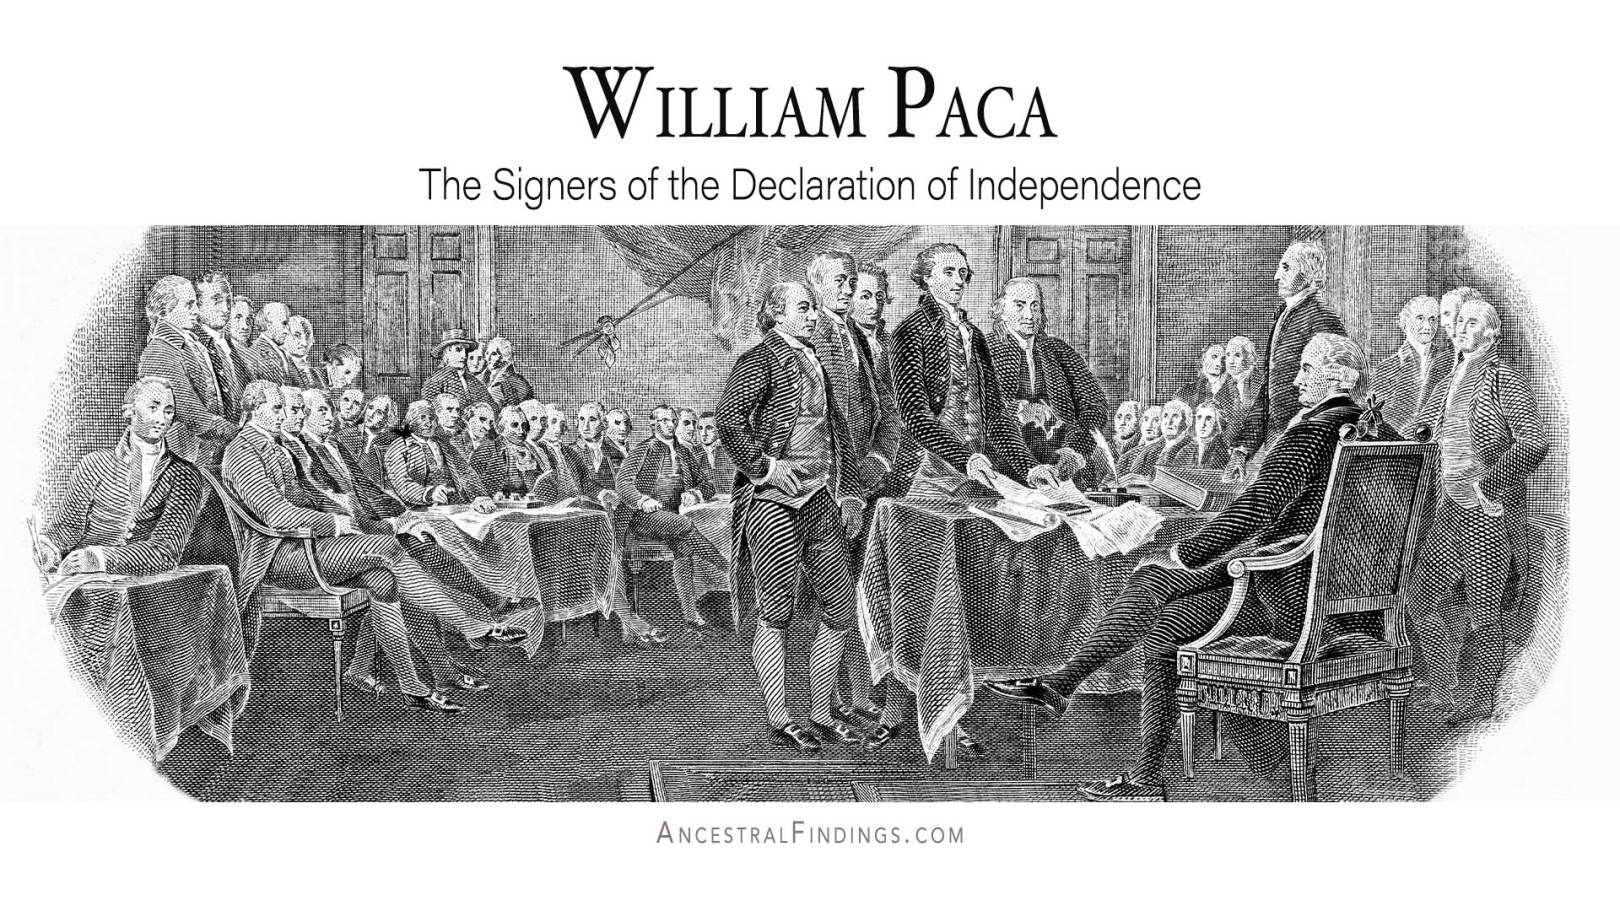 William Paca: The Signers of the Declaration of Independence